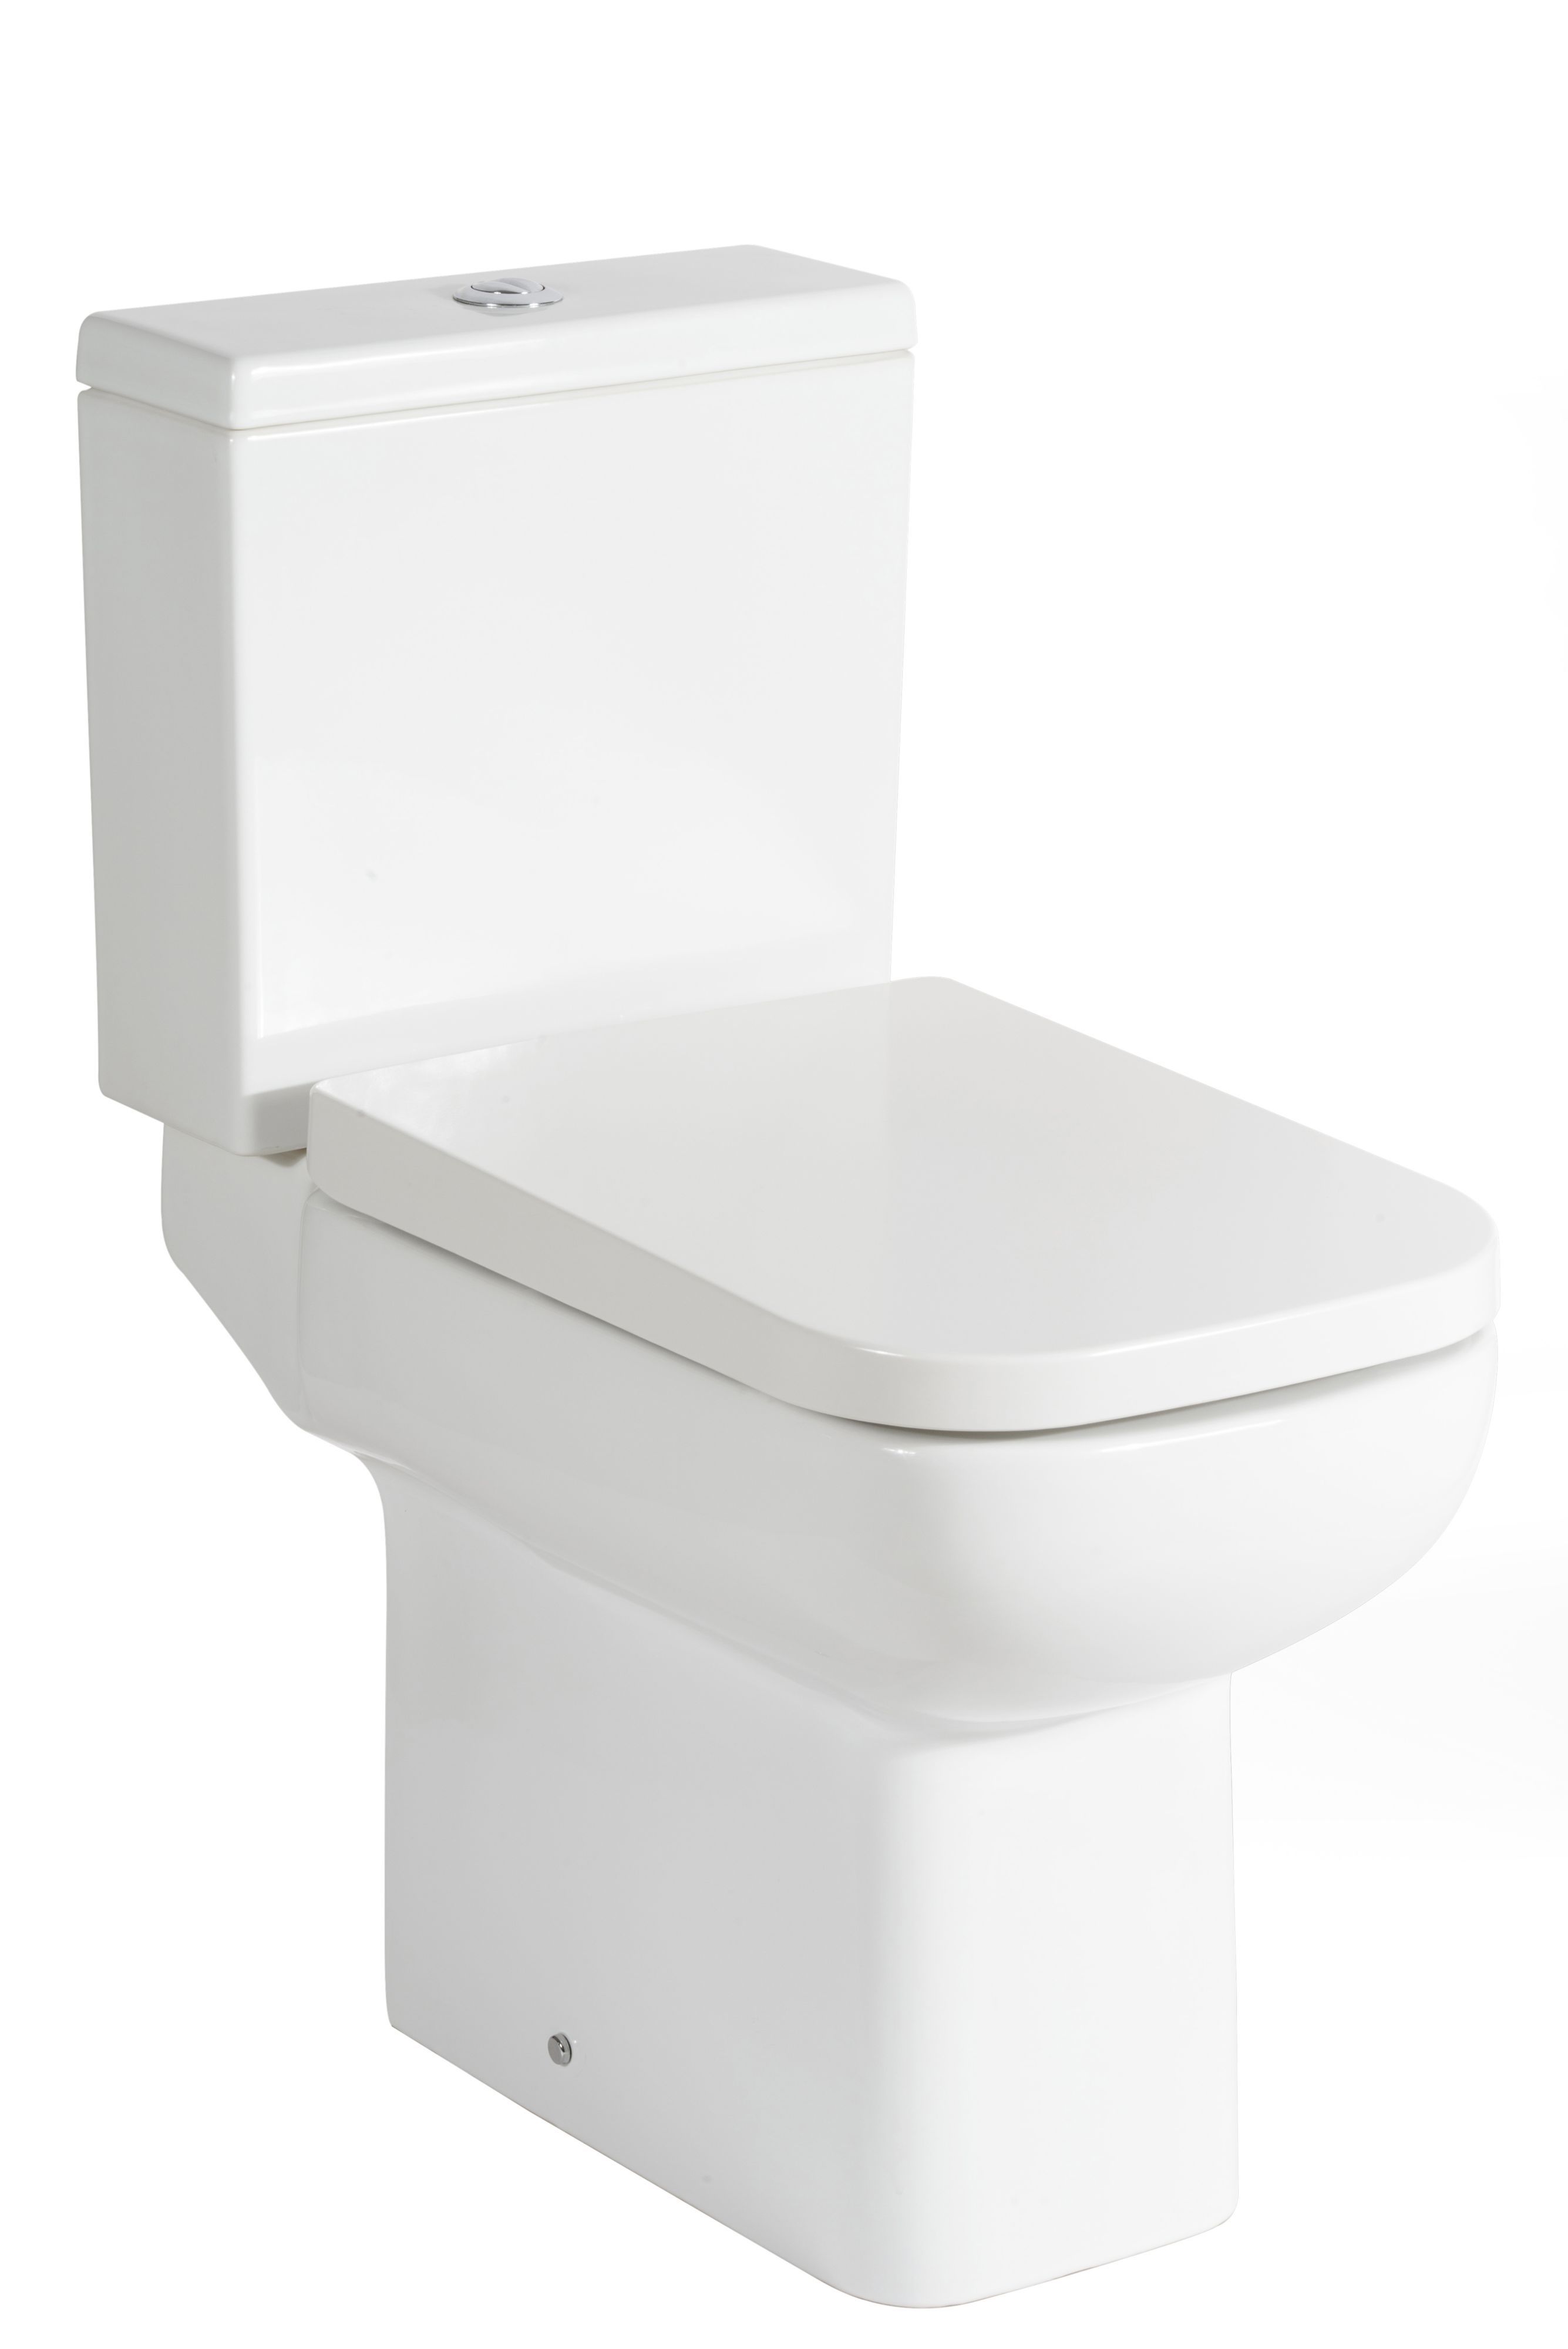 toilet and seat